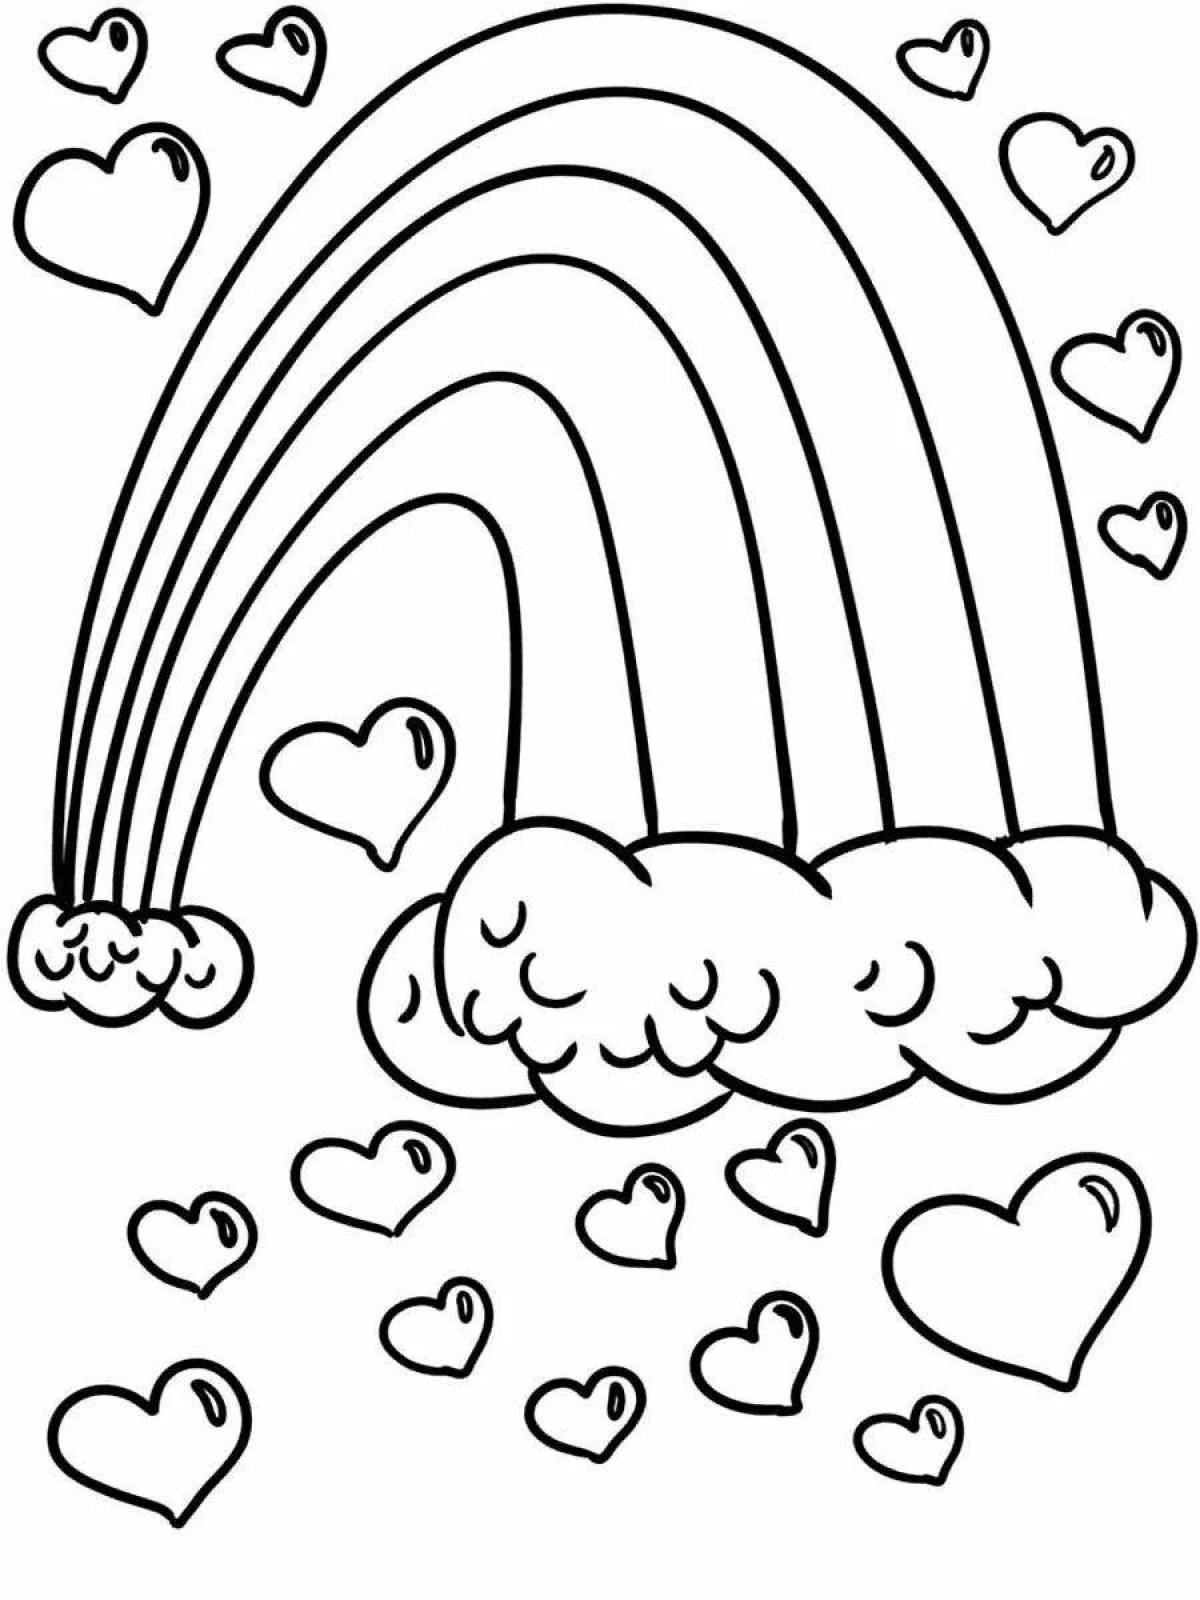 Crazy Rainbow Coloring Pages